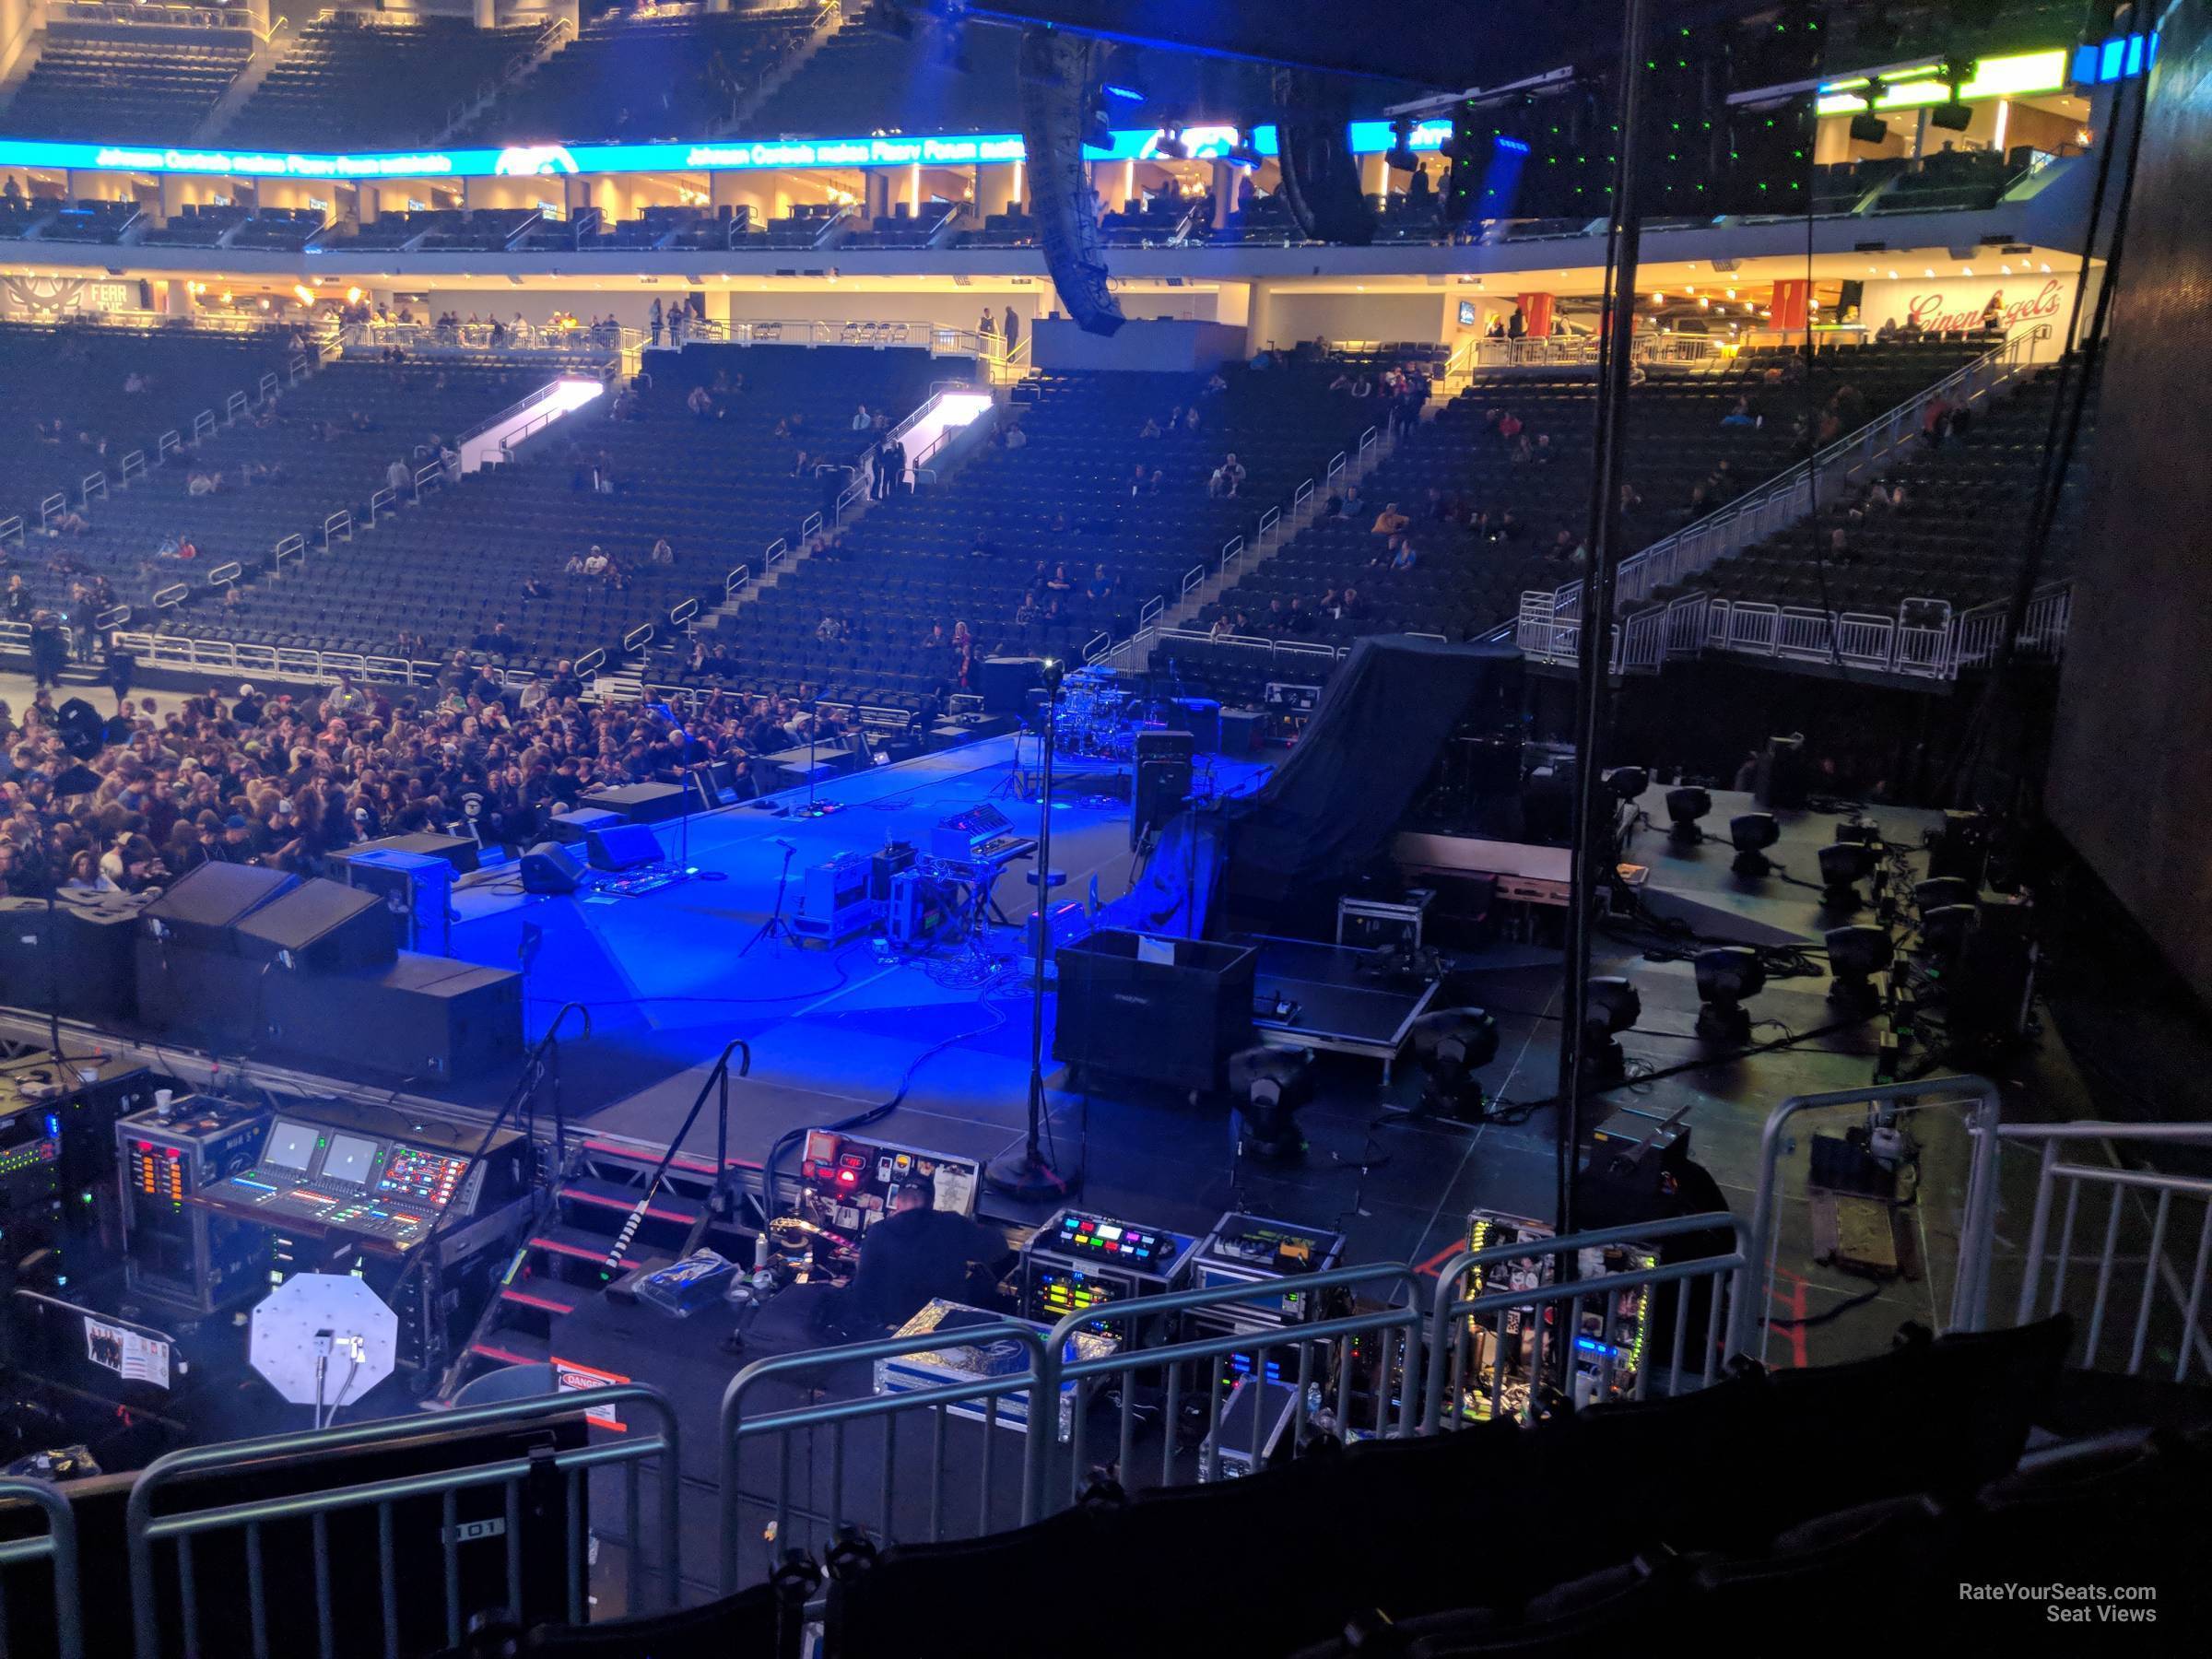 section 114, row 13 seat view  for concert - fiserv forum